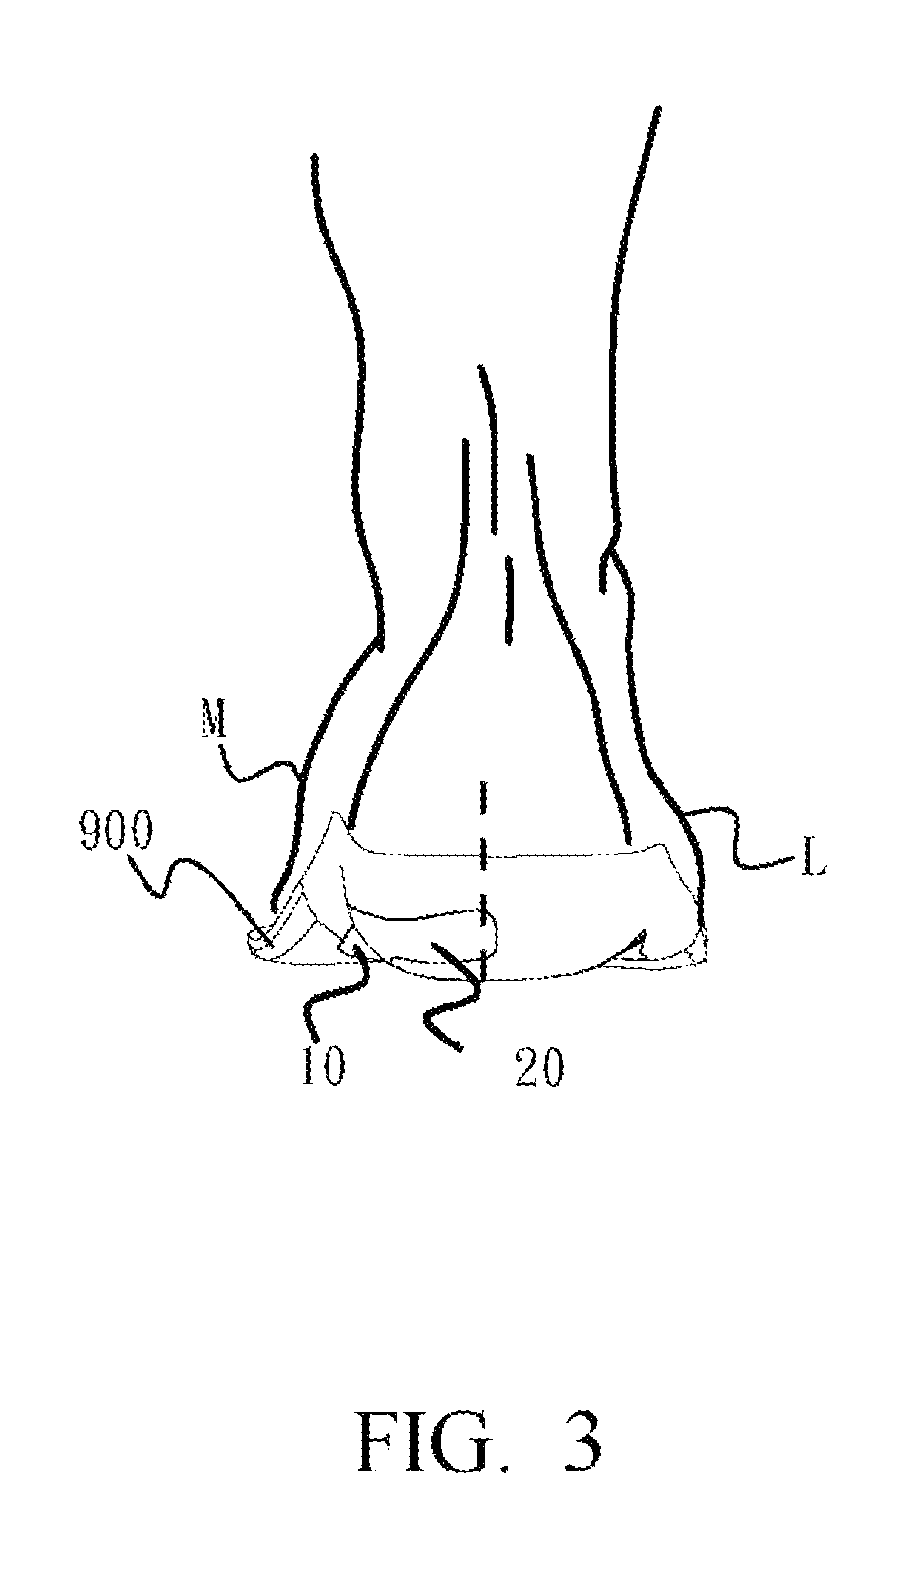 Device for three-dimensional foot motion control and plantar pressure redistribution